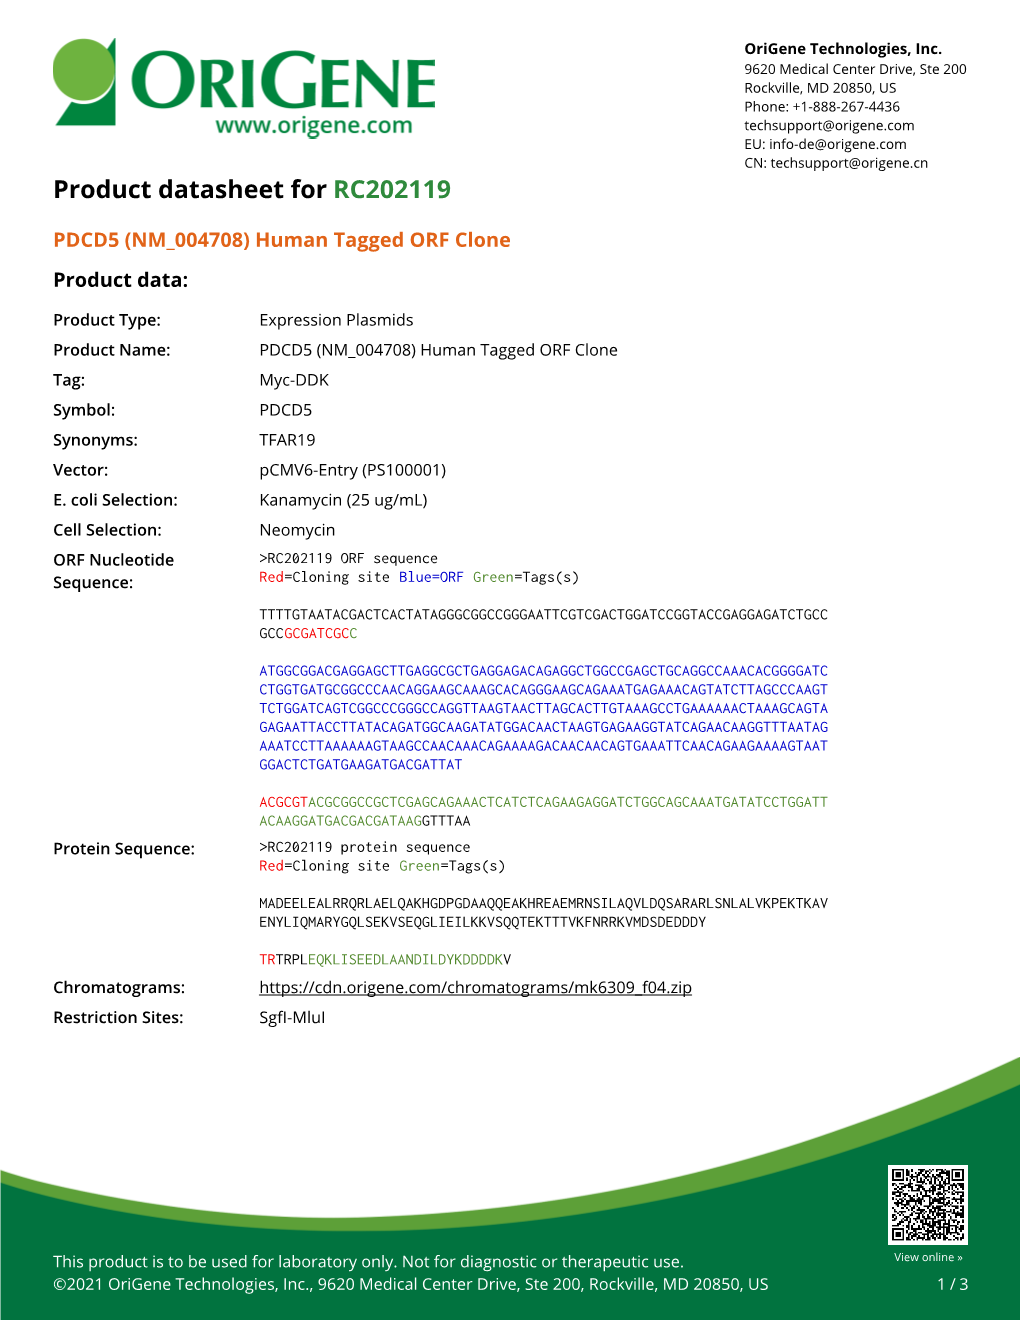 PDCD5 (NM 004708) Human Tagged ORF Clone Product Data